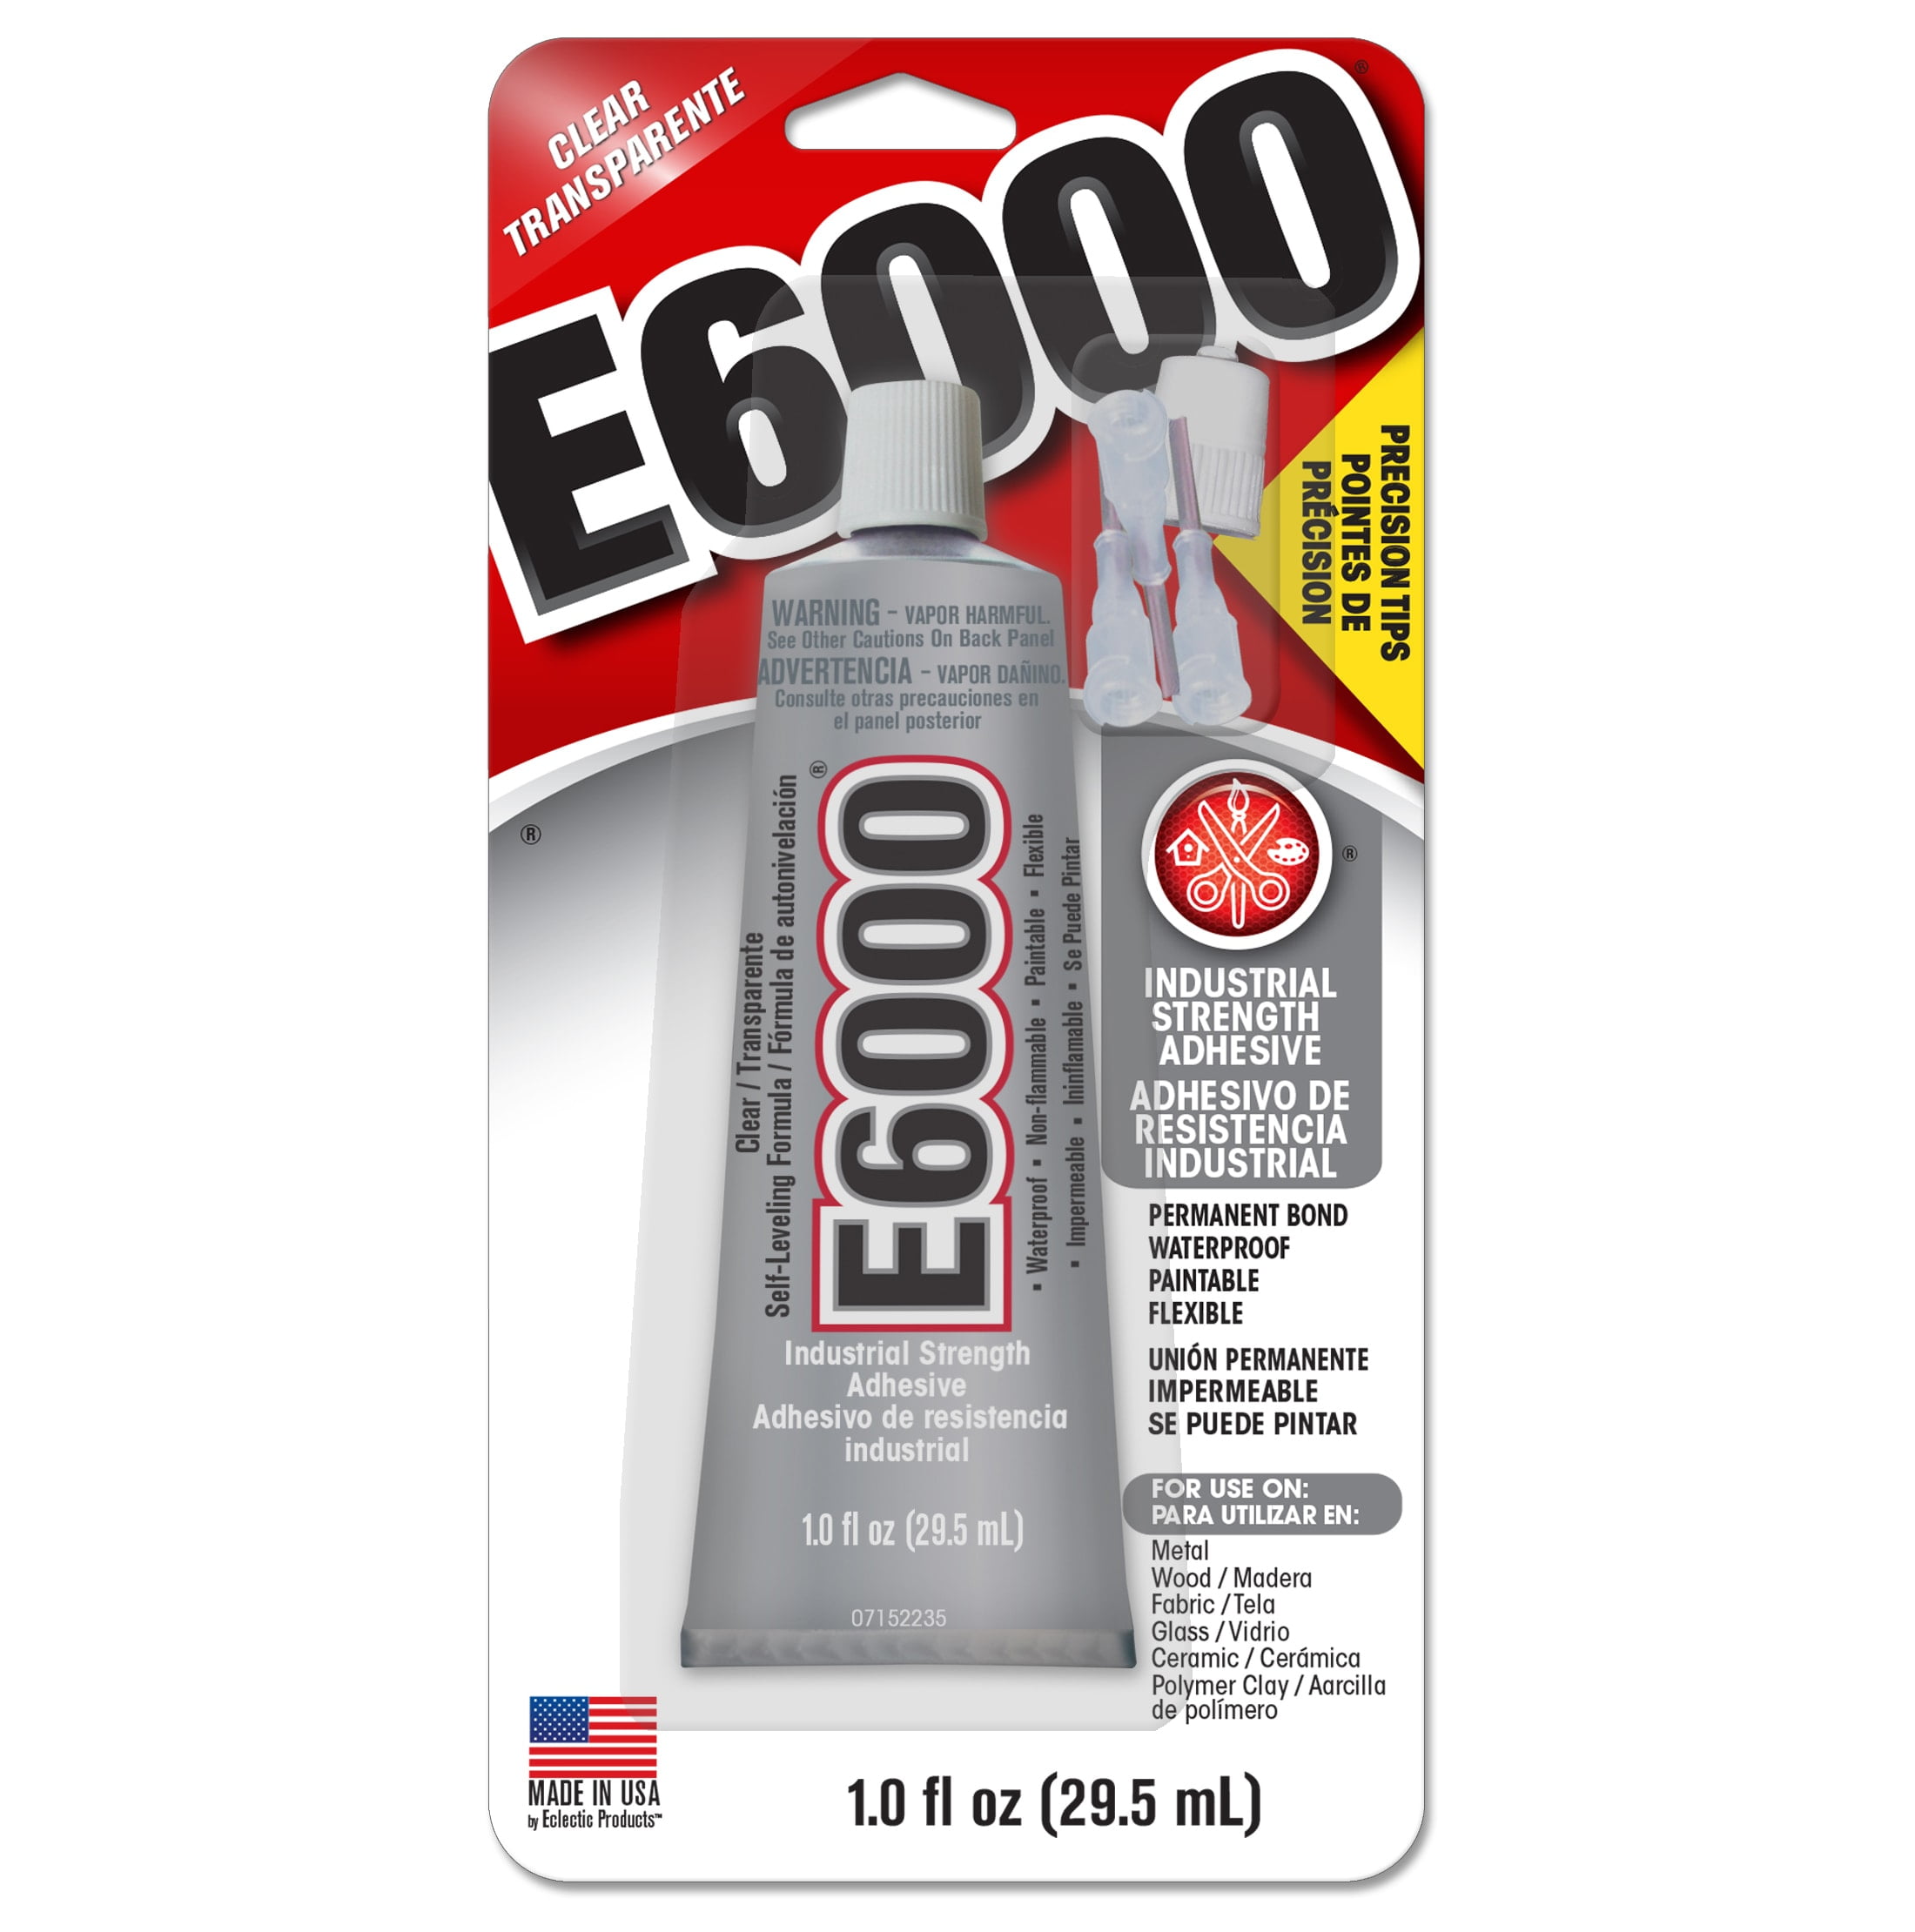 ECLECTIC PRODUCTS E-6000 Industrial Strength Craft Adhesive